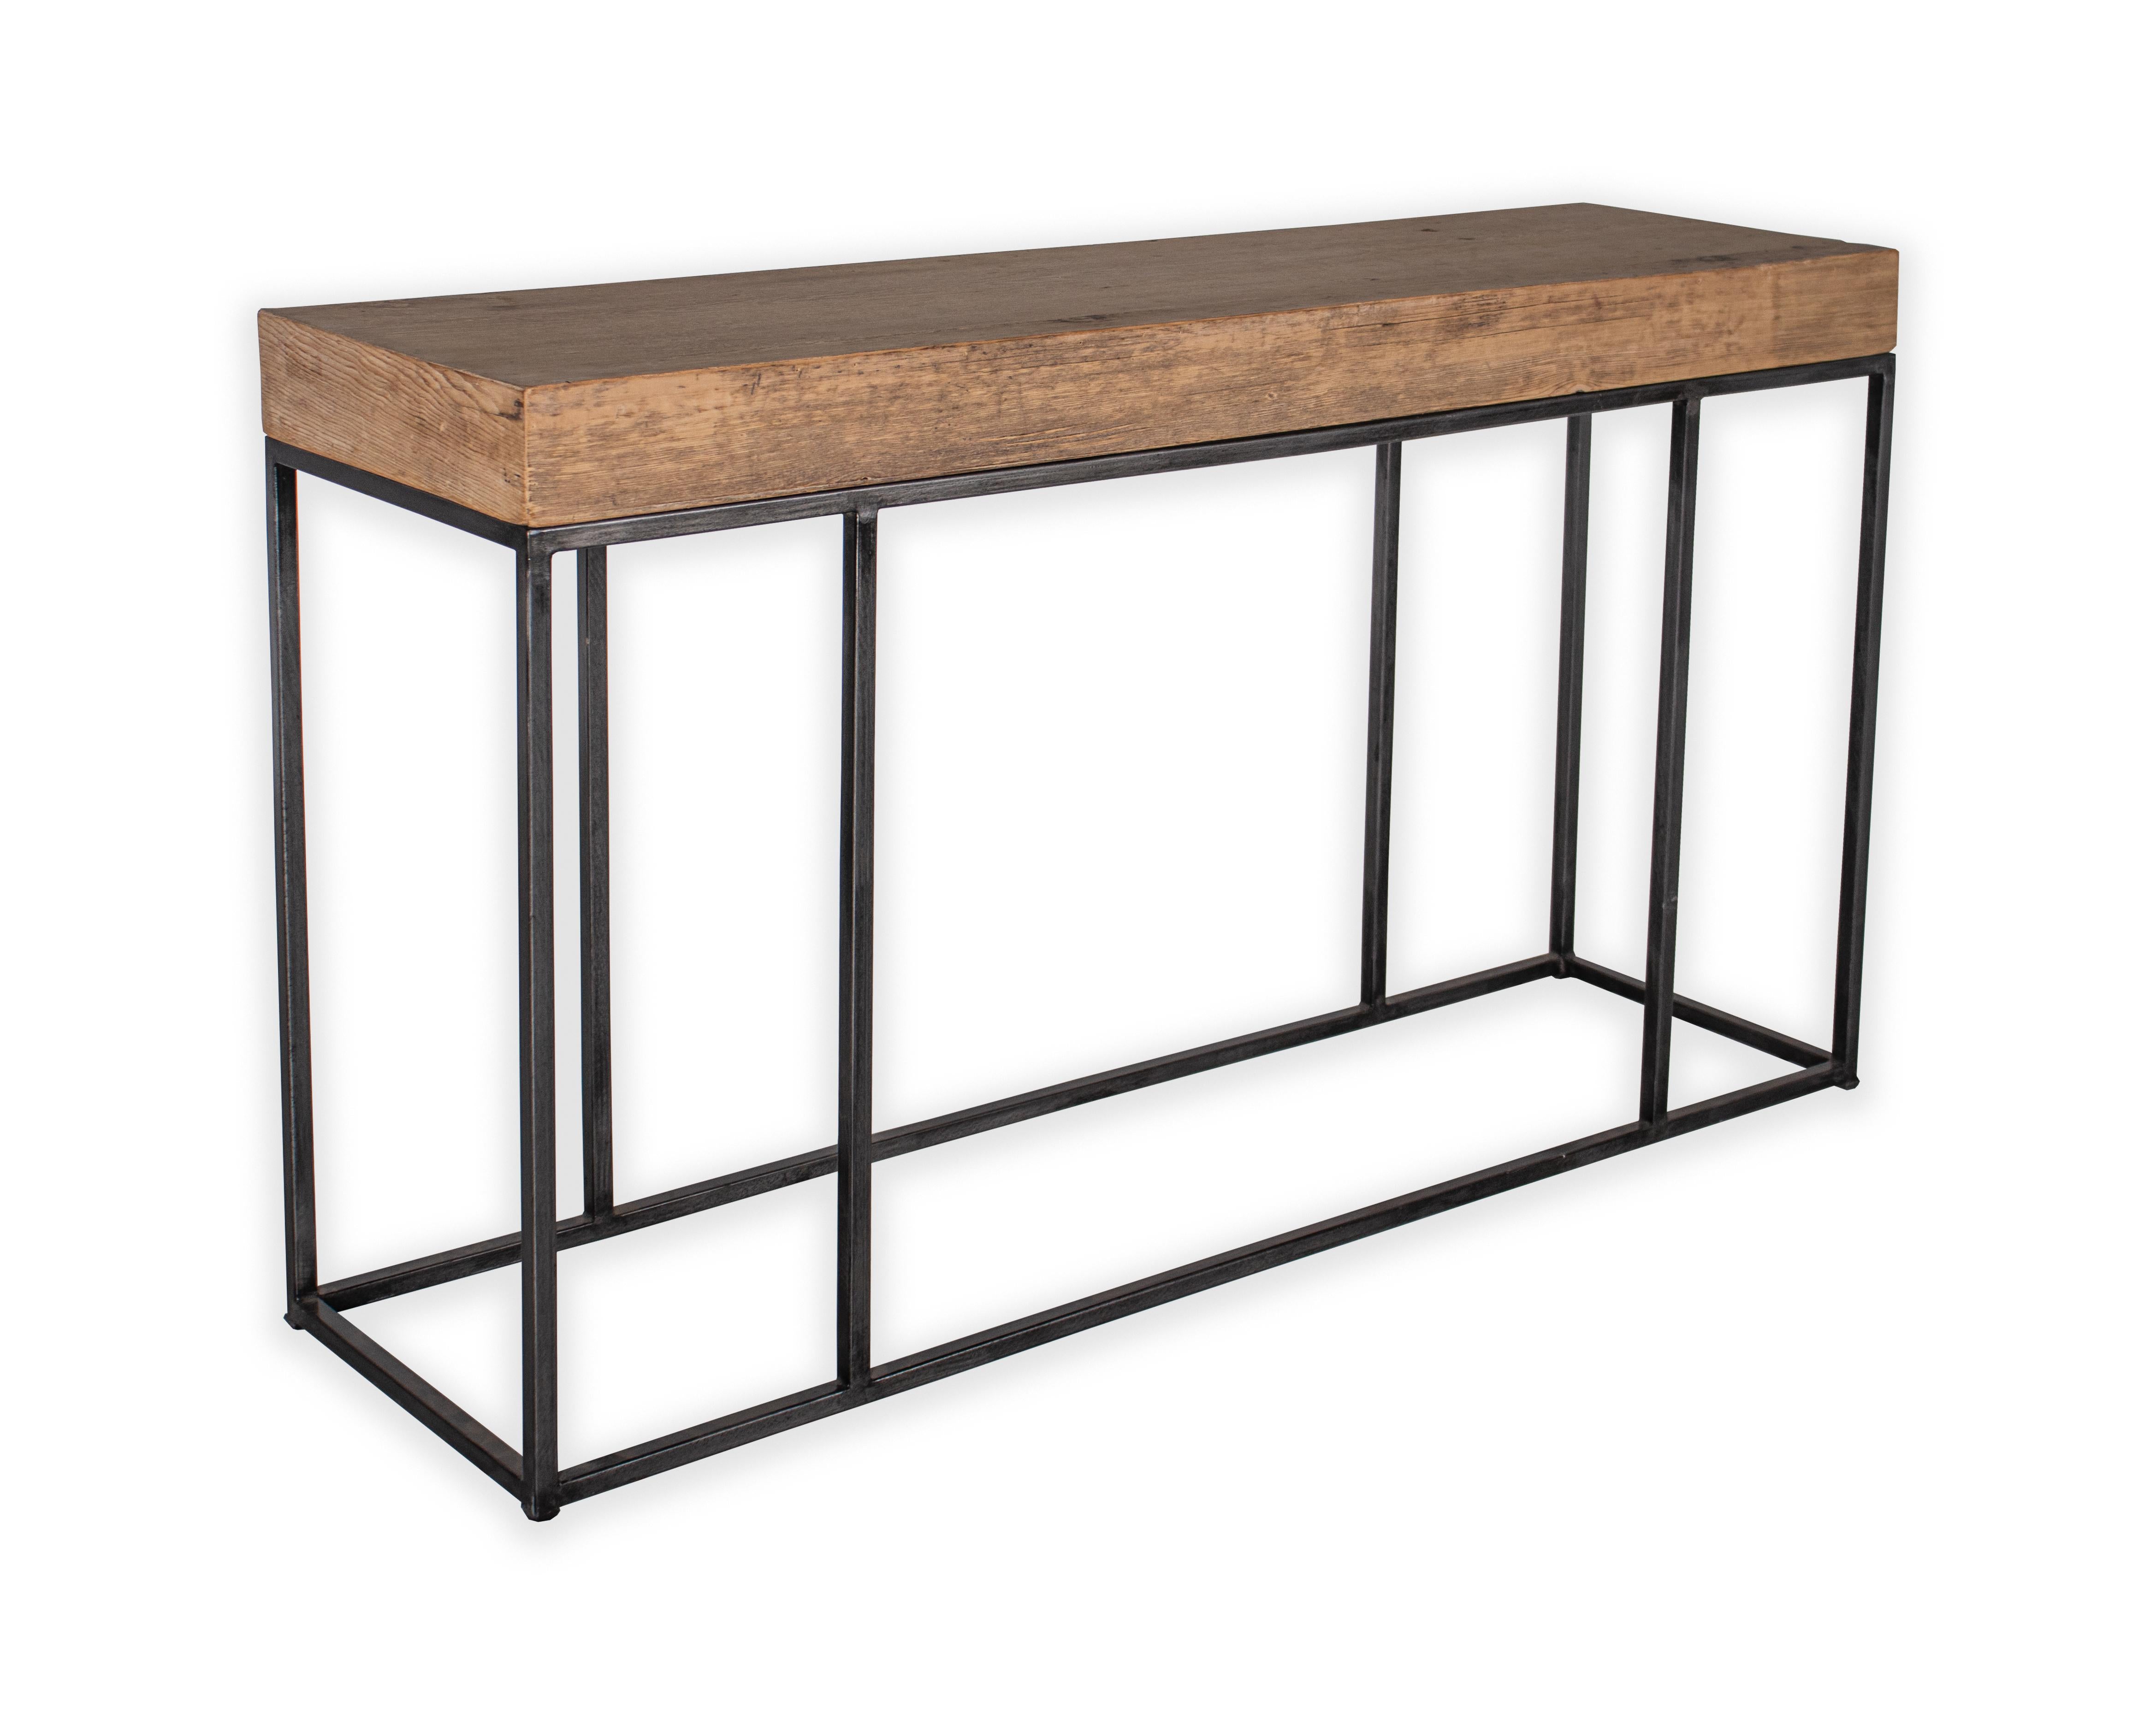 Console table made from reclaimed elm wood with steel base. In my organic, contemporary, vintage and mid-century modern aesthetic.

Part of our one of a kind Le Monde collection. Exclusive to Brendan Bass.